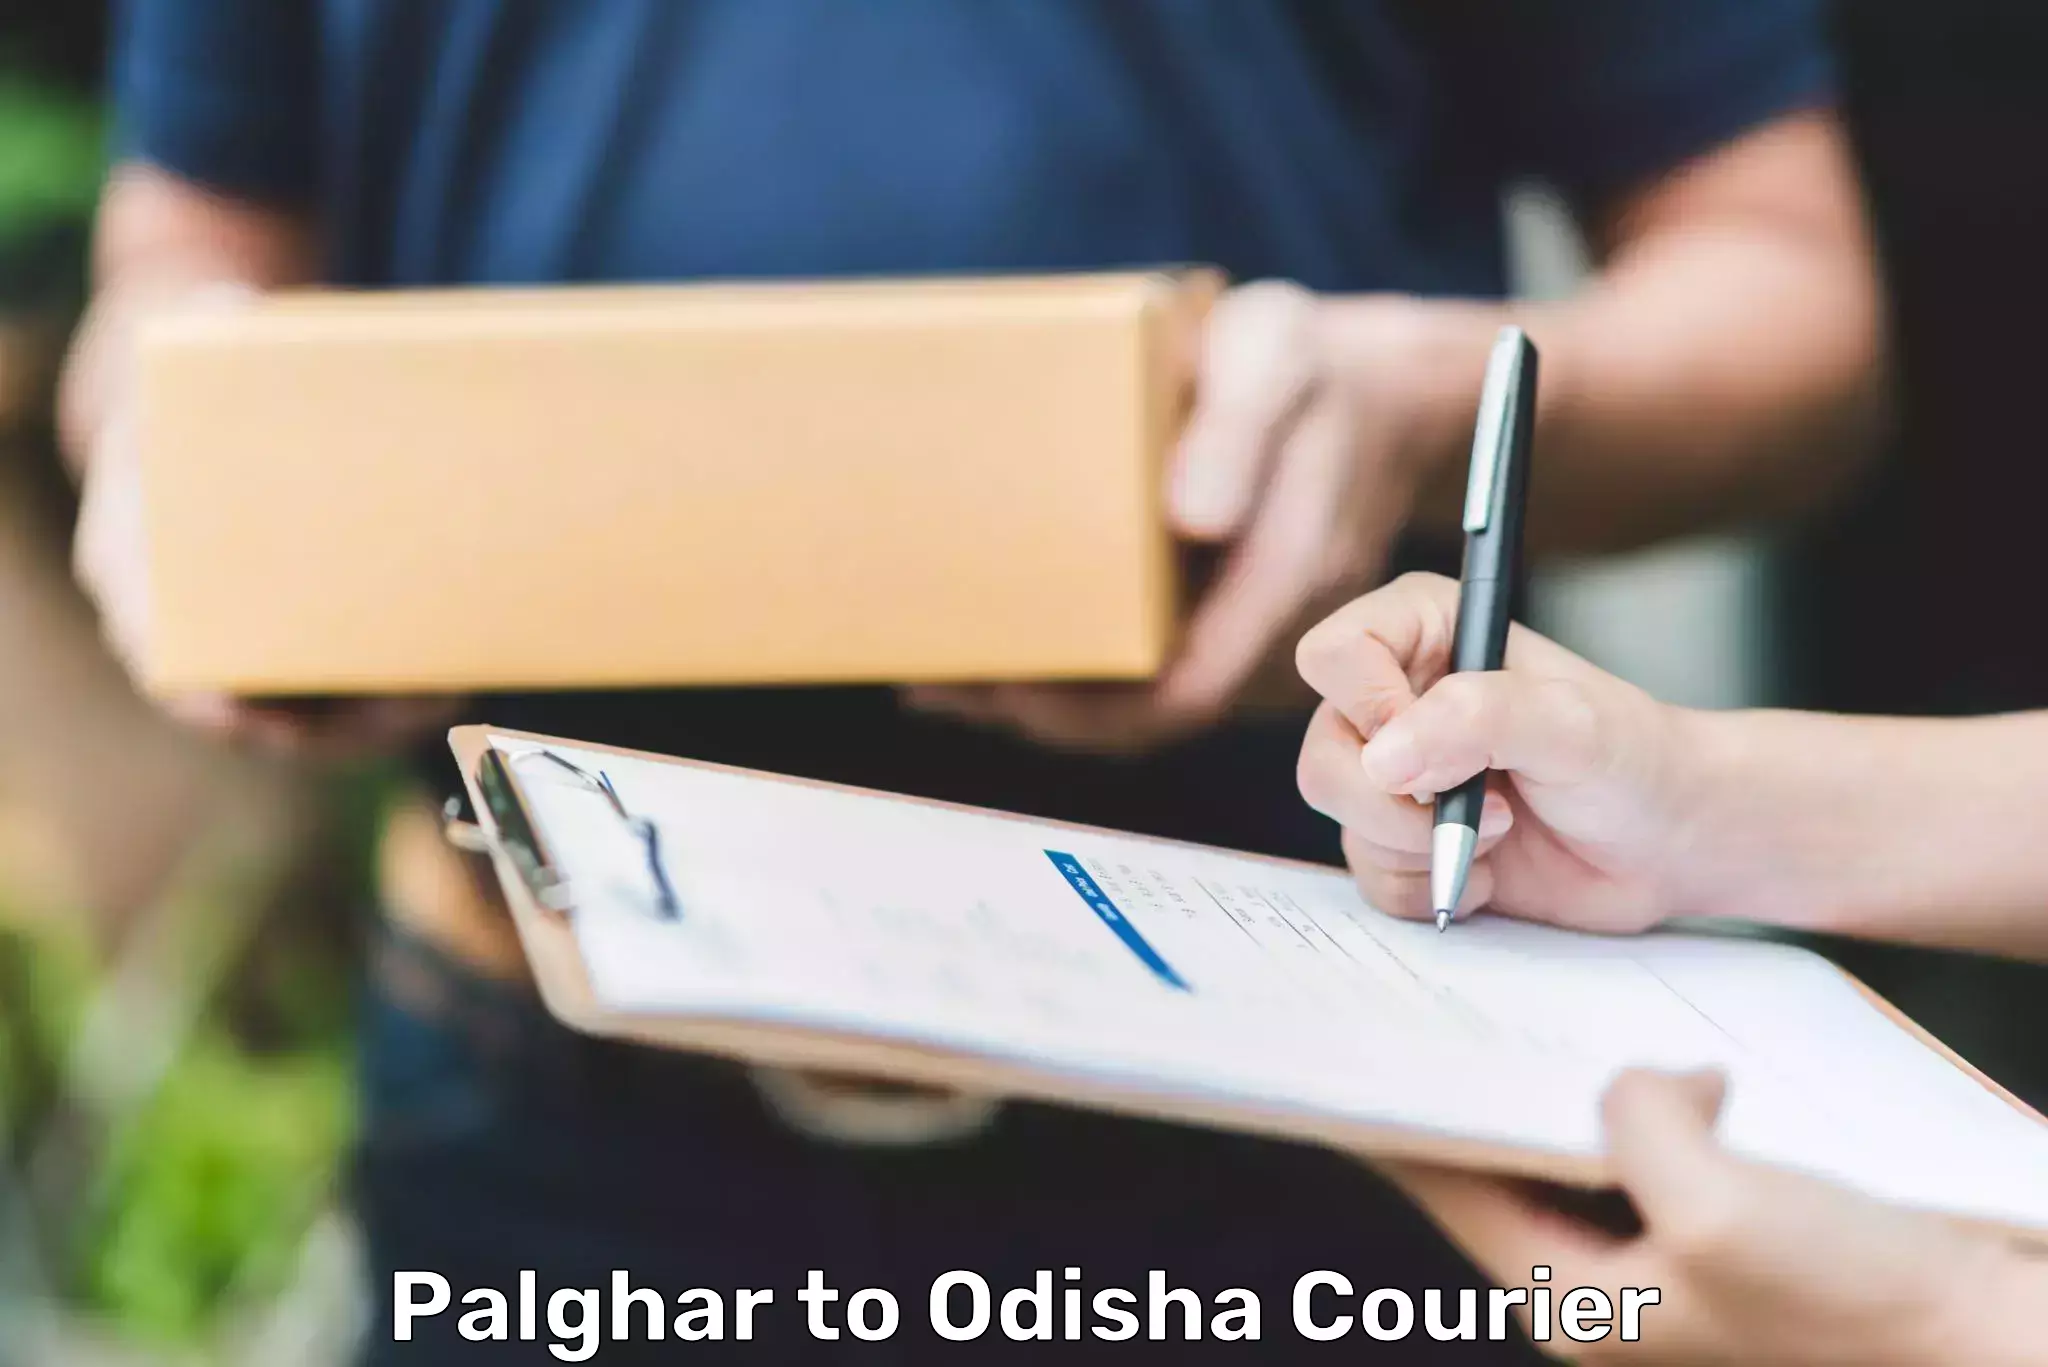 Express delivery network Palghar to Odisha